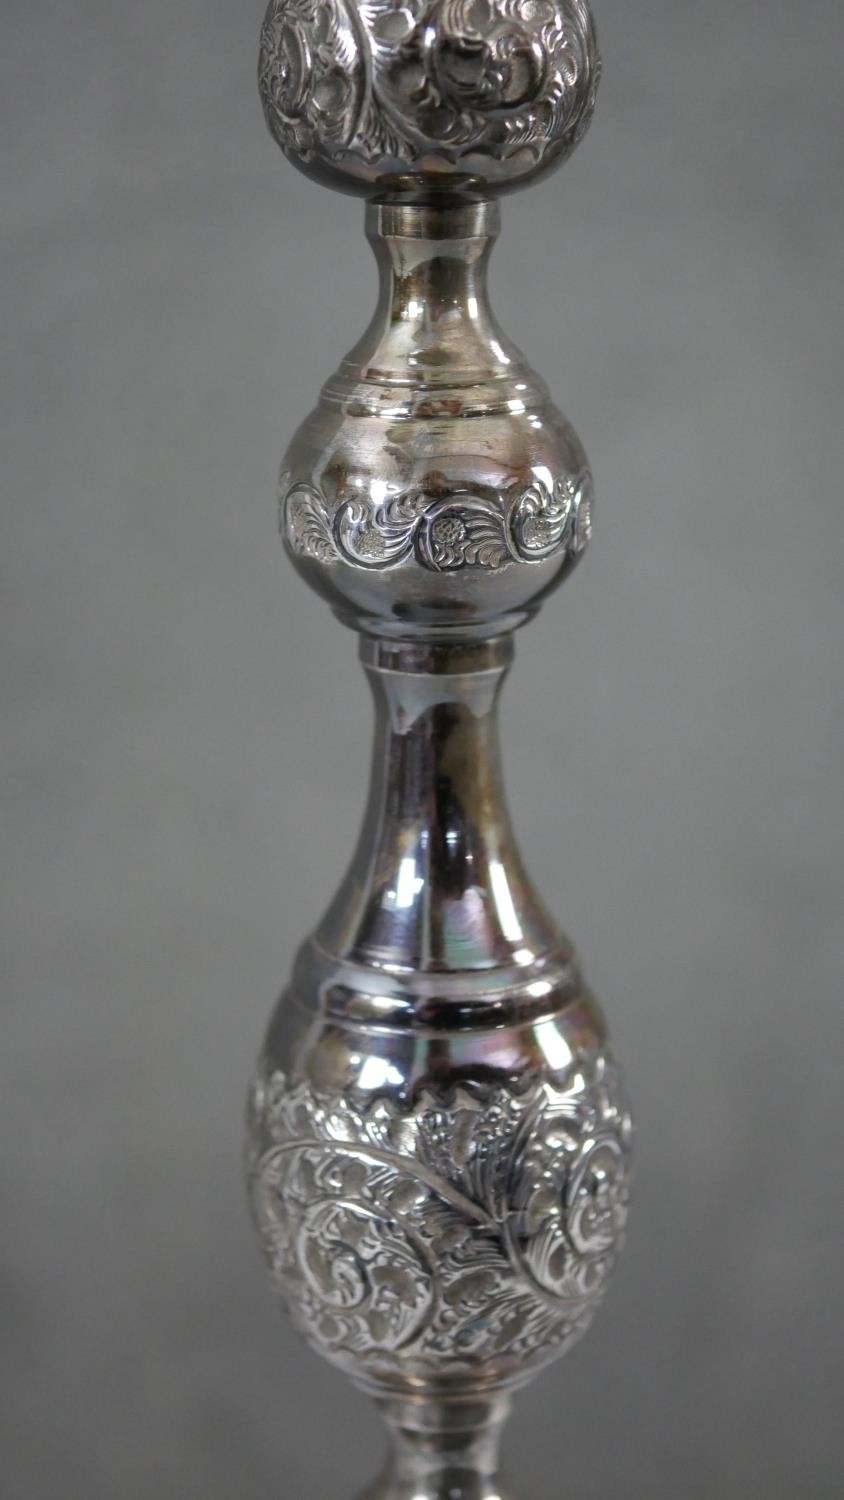 A pair of 1920'a repousse silver candlesticks with scrolling foliate design on scalloped bases. - Image 7 of 8